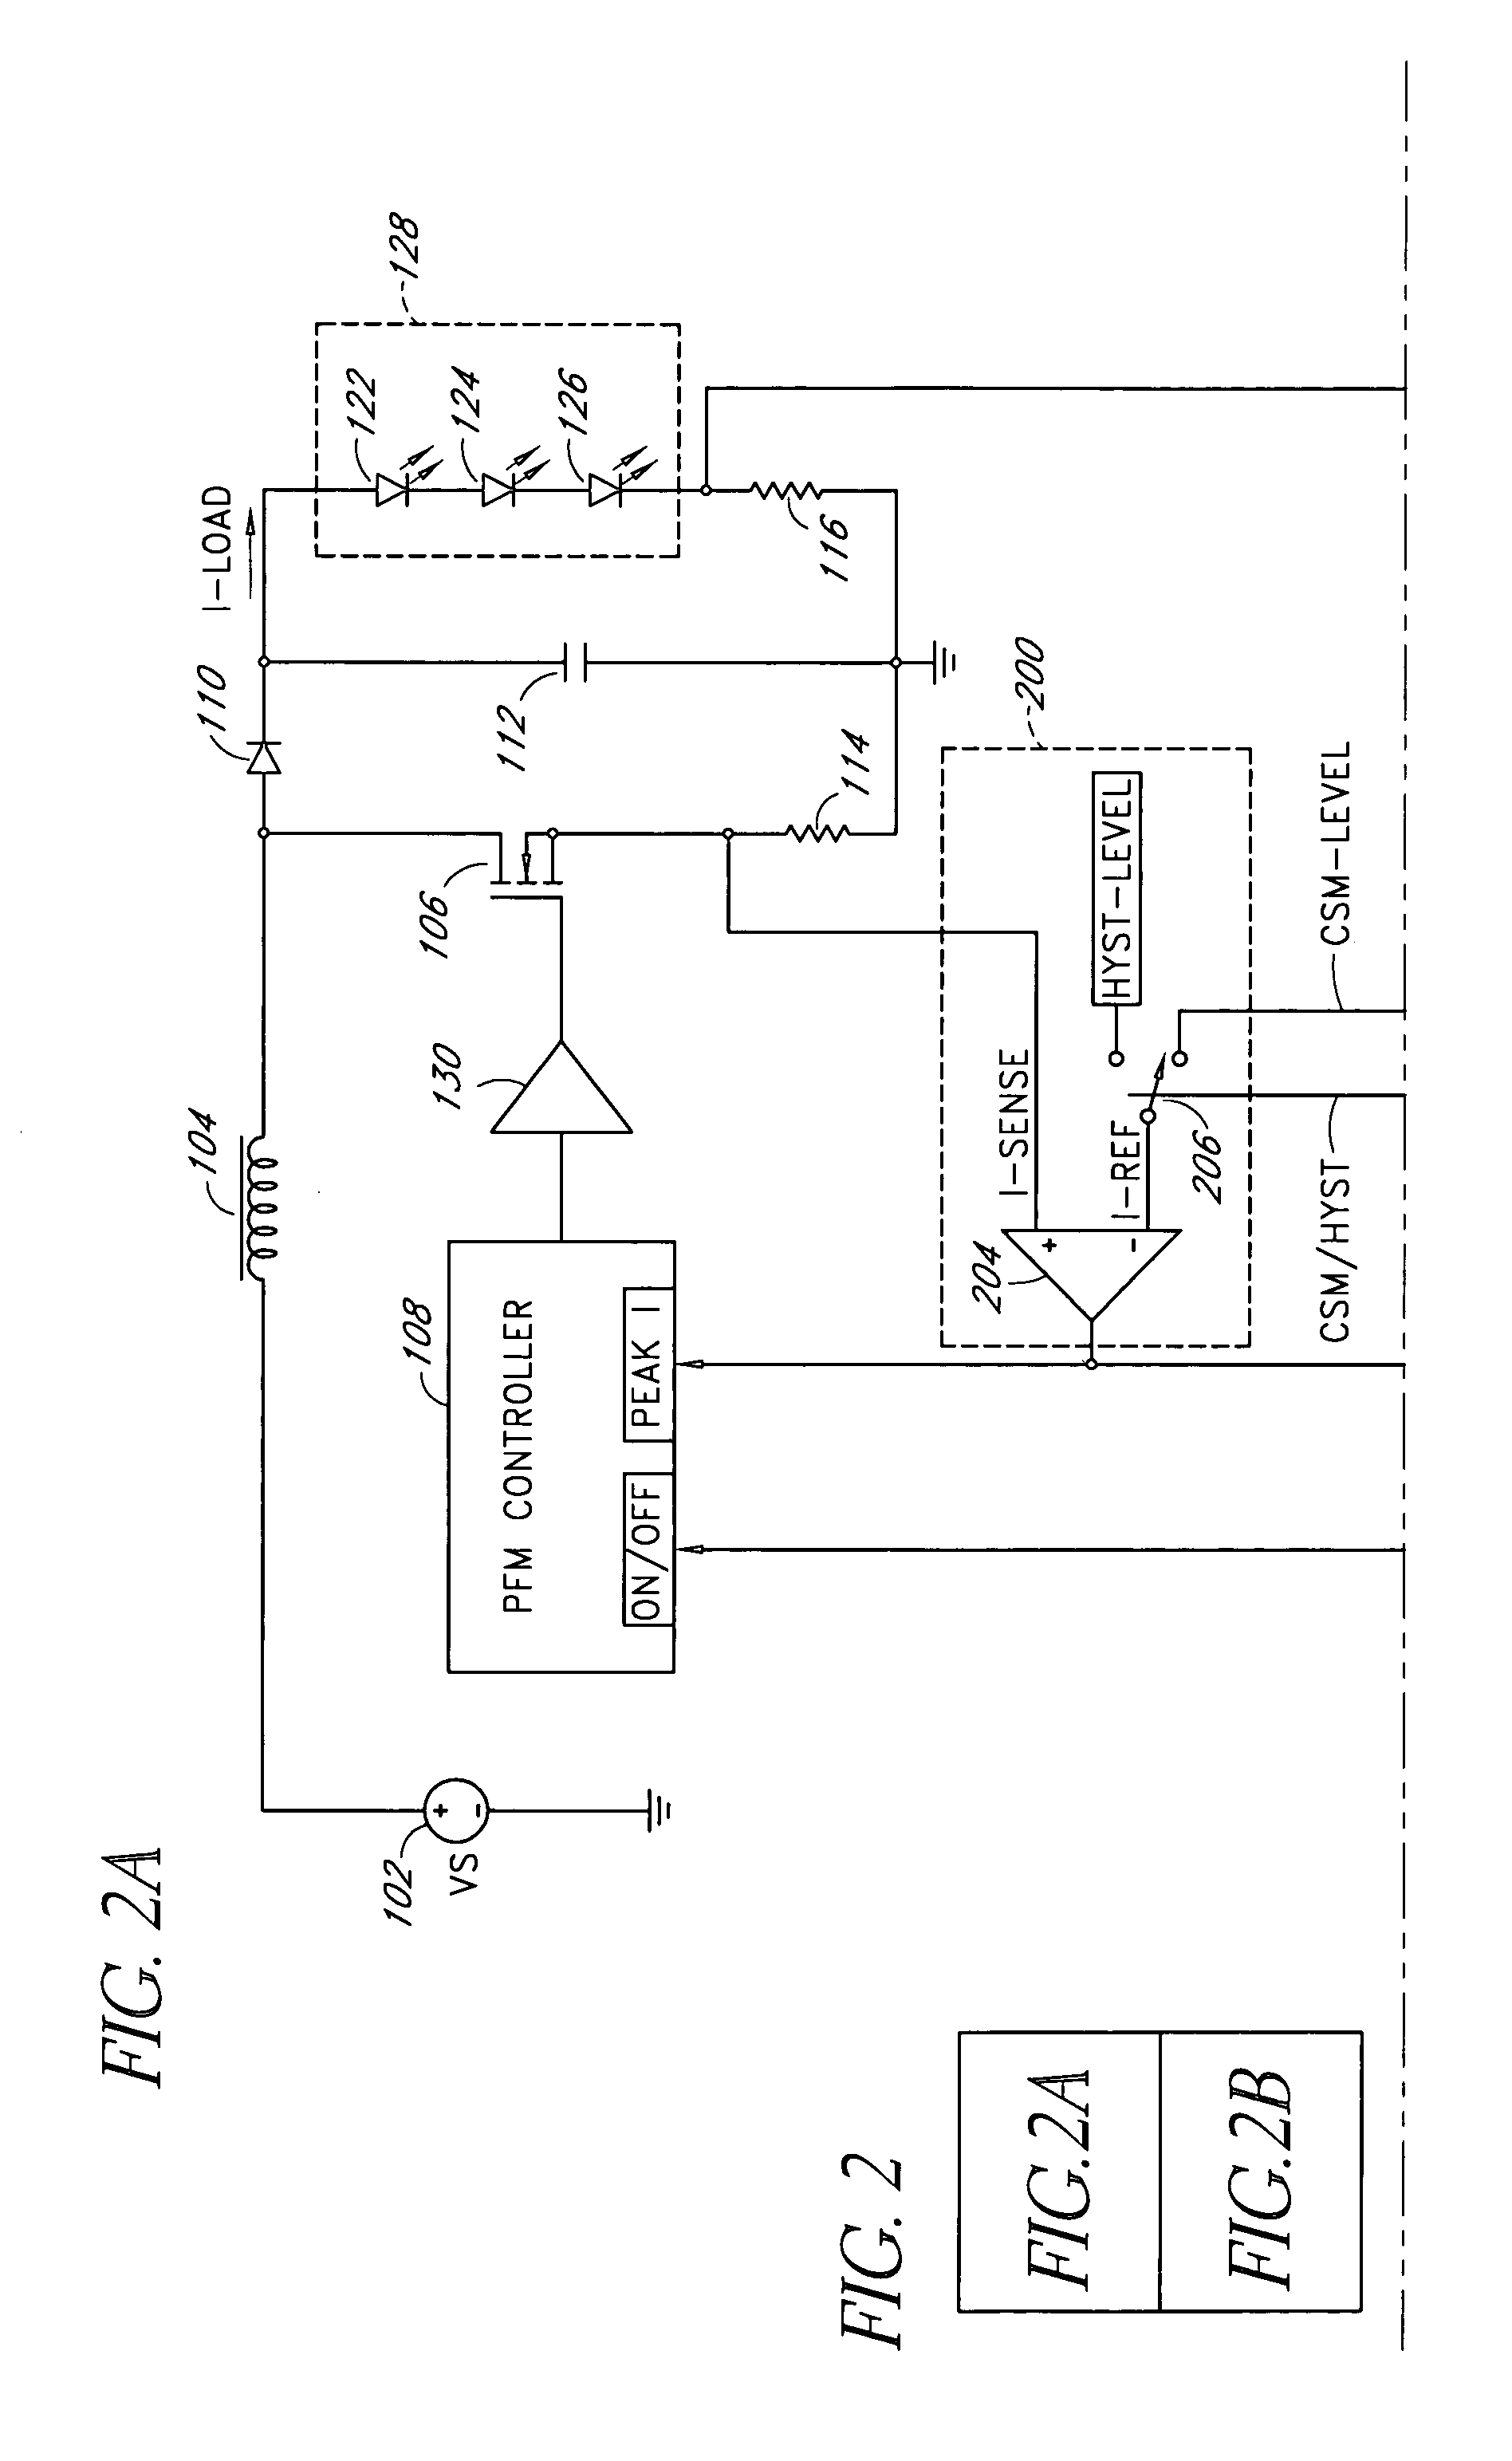 Method and apparatus to switch operating modes in a PFM converter